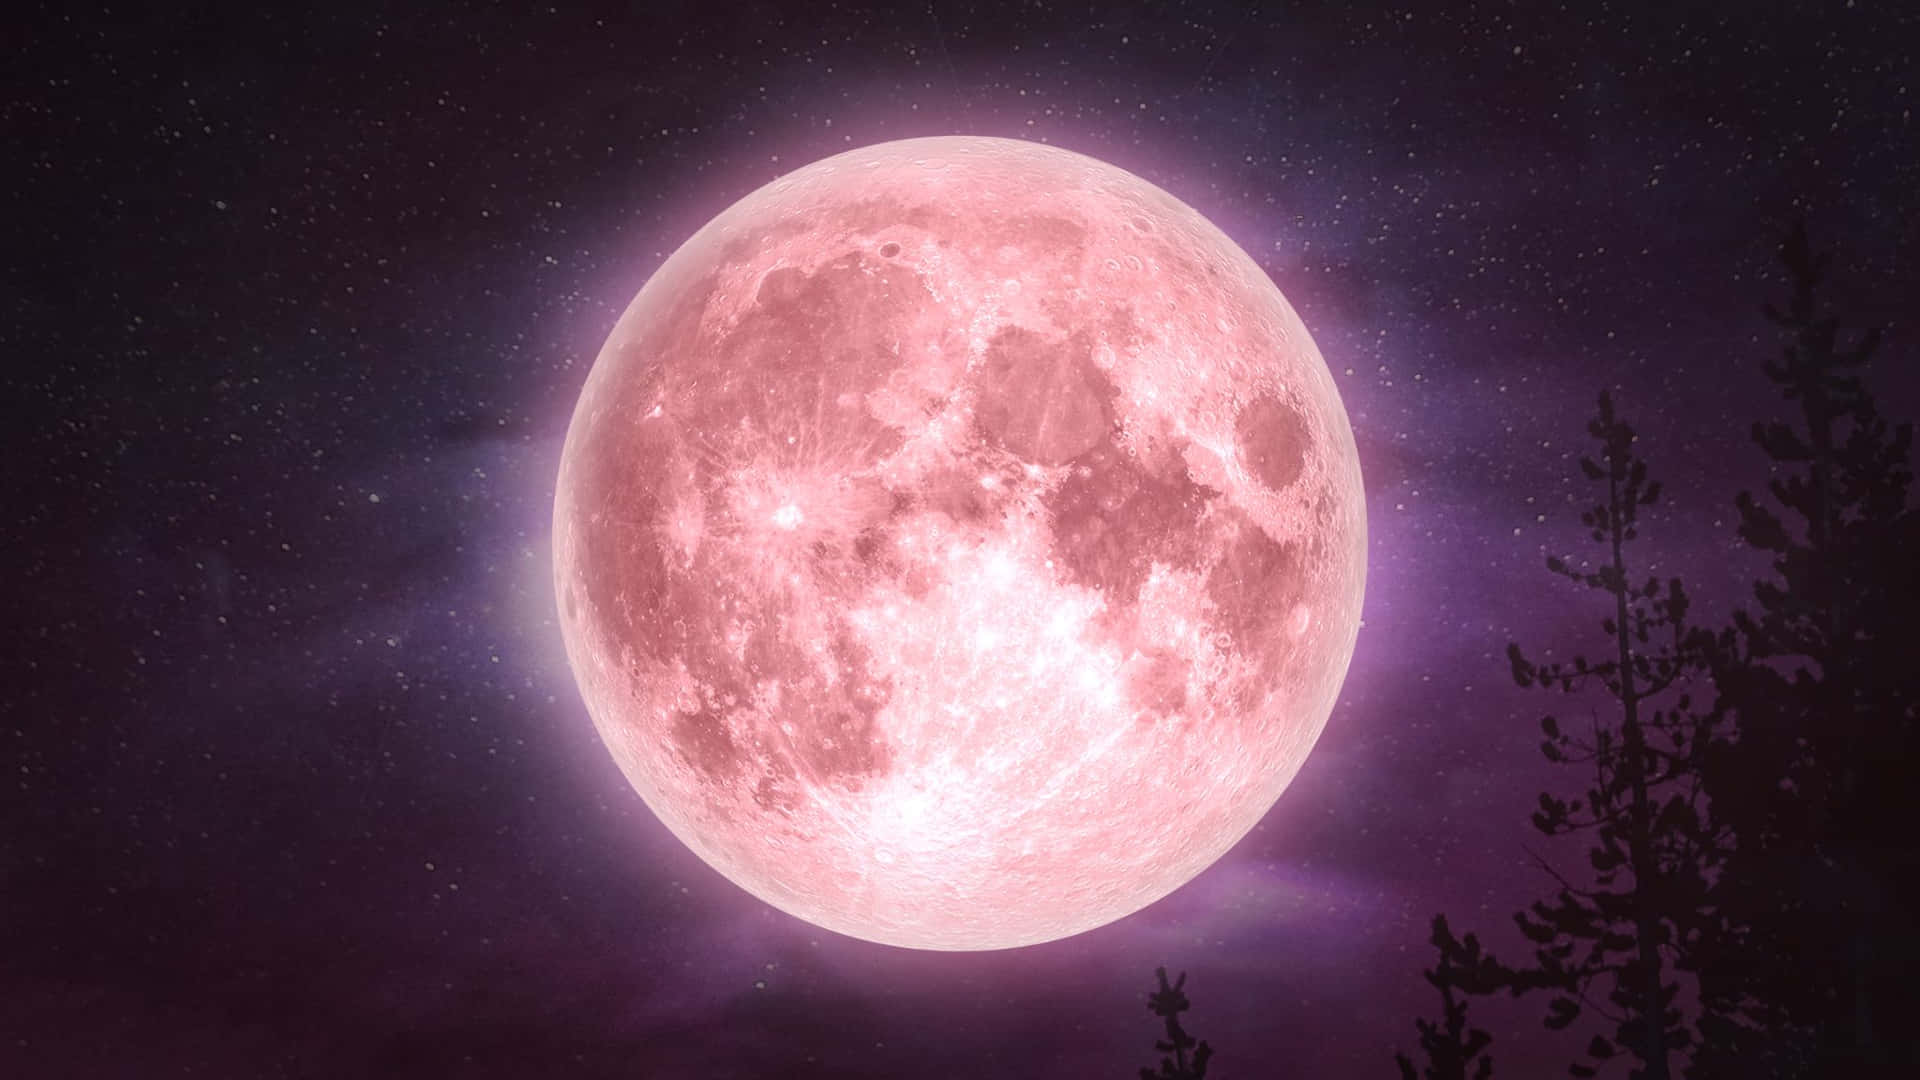 A beautiful pink moon illuminated in a clear night sky Wallpaper